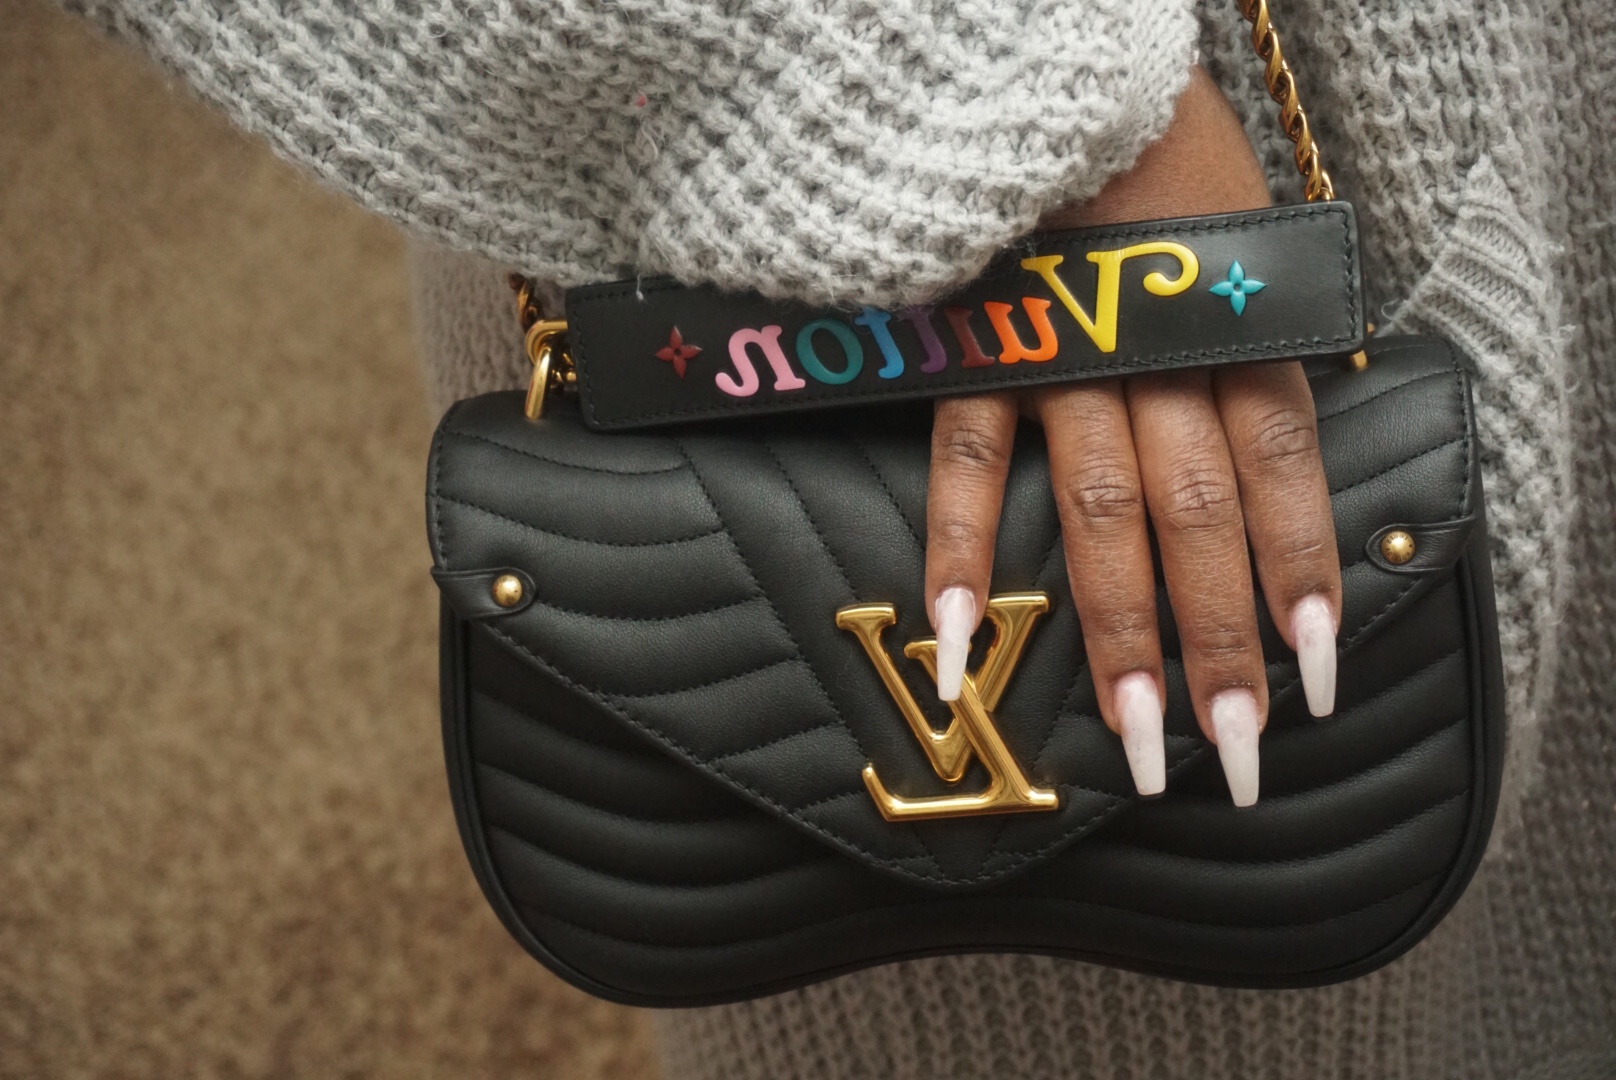 WHAT FITS IN MY LOUIS VUITTON NEW WAVE CHAIN BAG